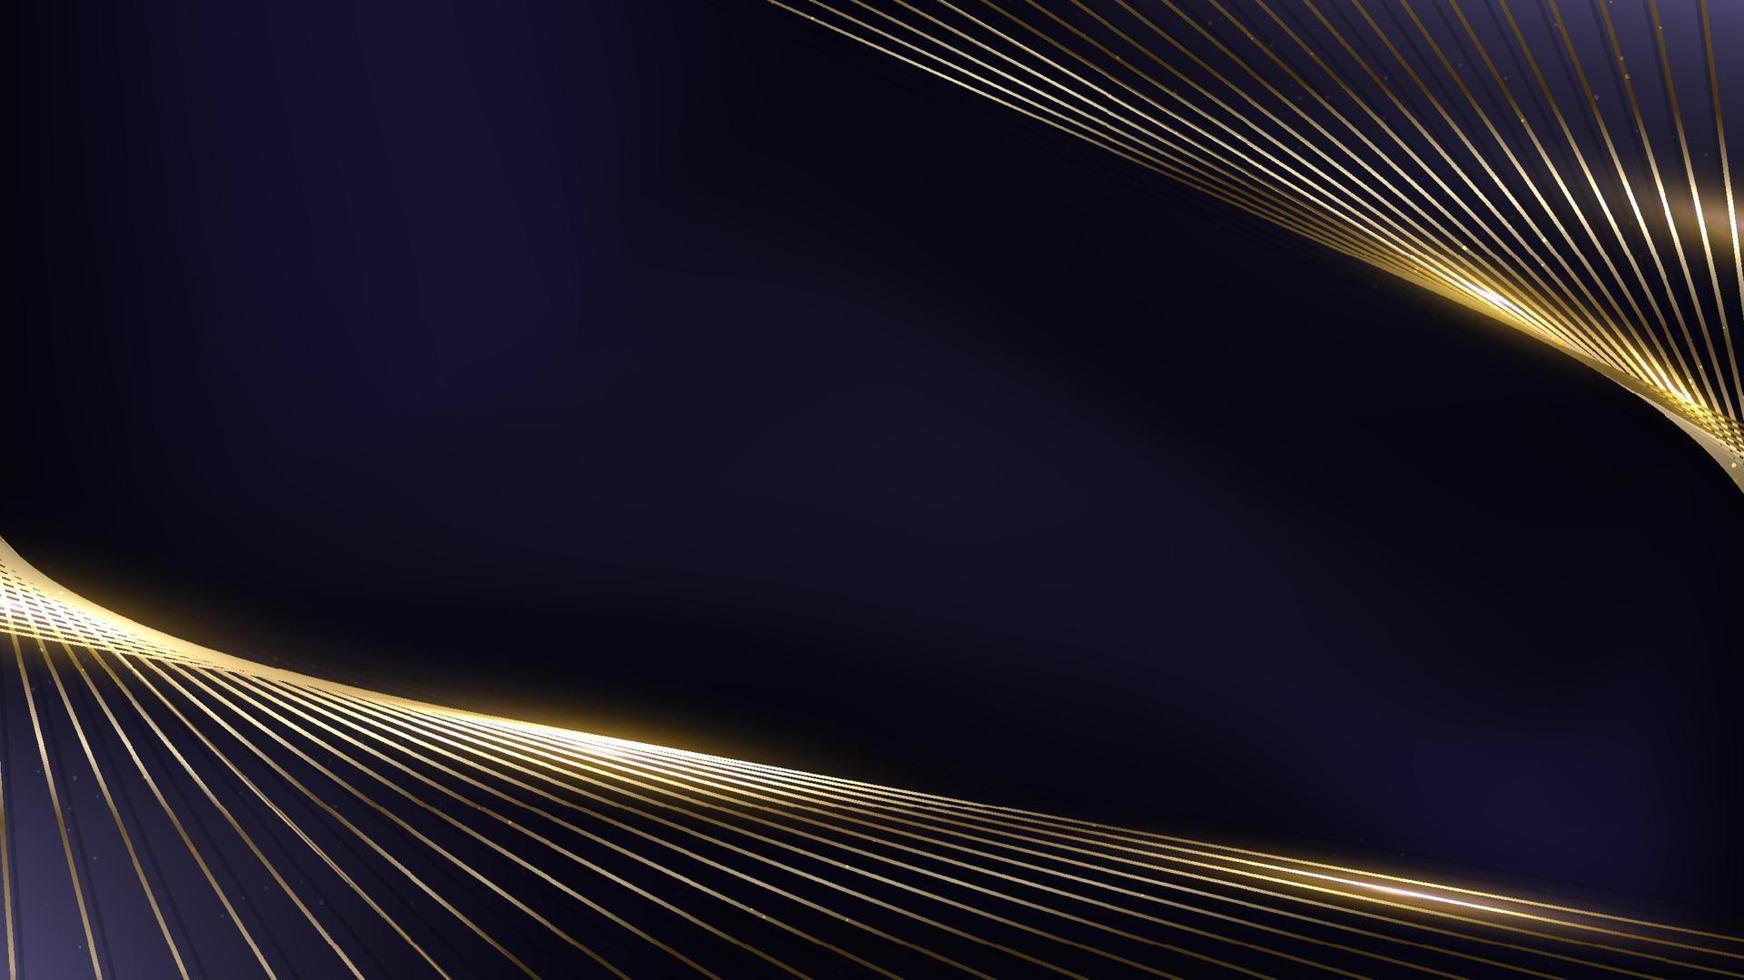 Abstract template golden lines pattern decoration with gold glitter and lighting effect on dark blue background luxury style vector